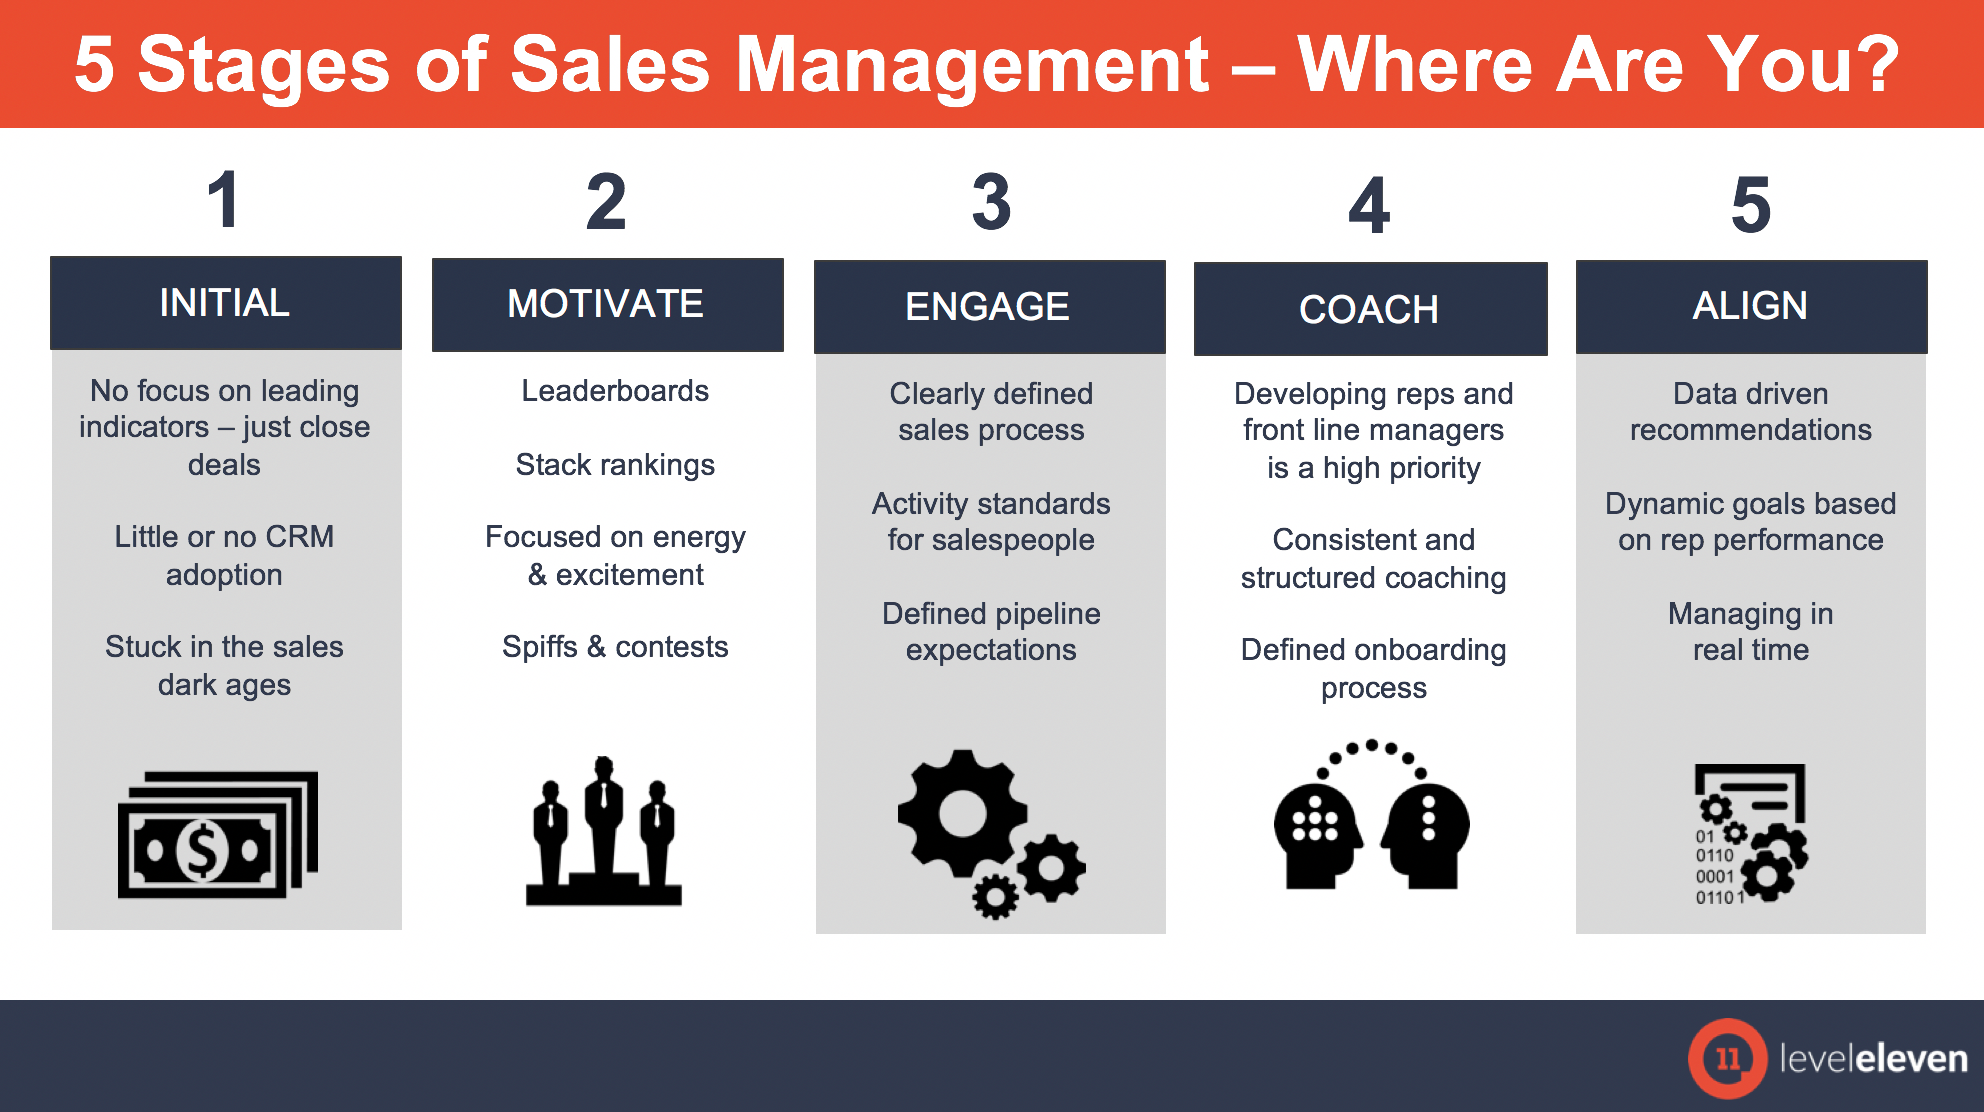 The 5 Stages of Sales Management